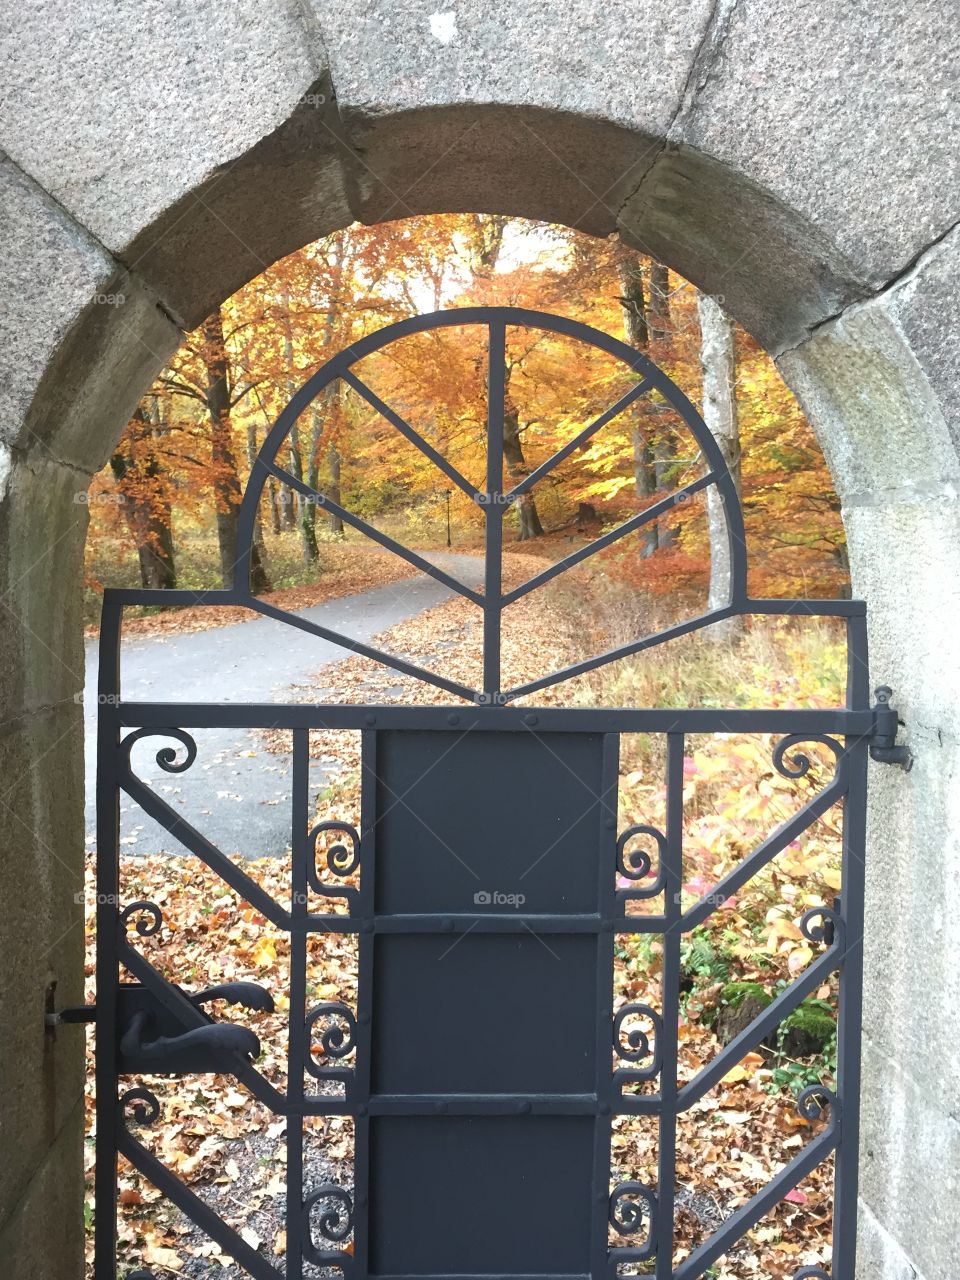 Looking through the gate